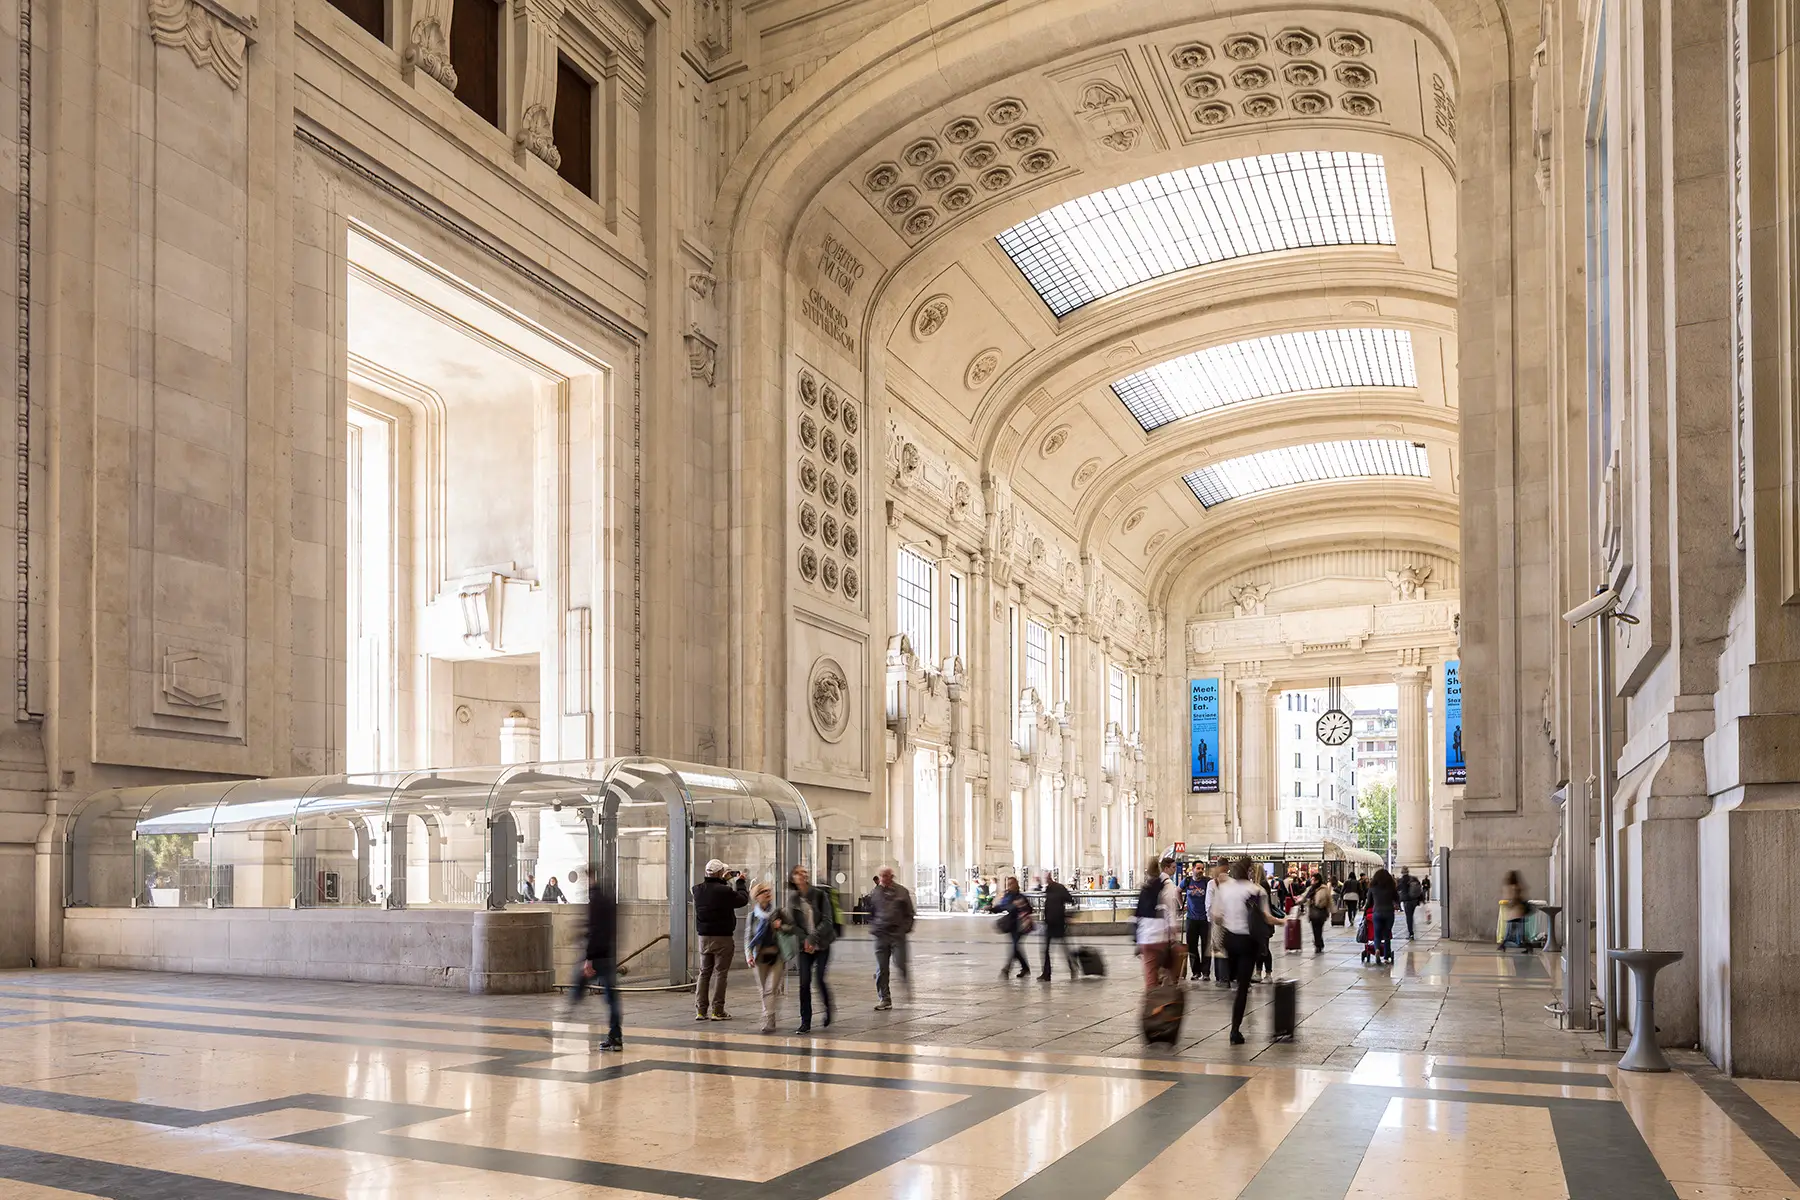 Interior of a grand railway station with marble arches and commuters - 	Milano Centrale railway station in Milan